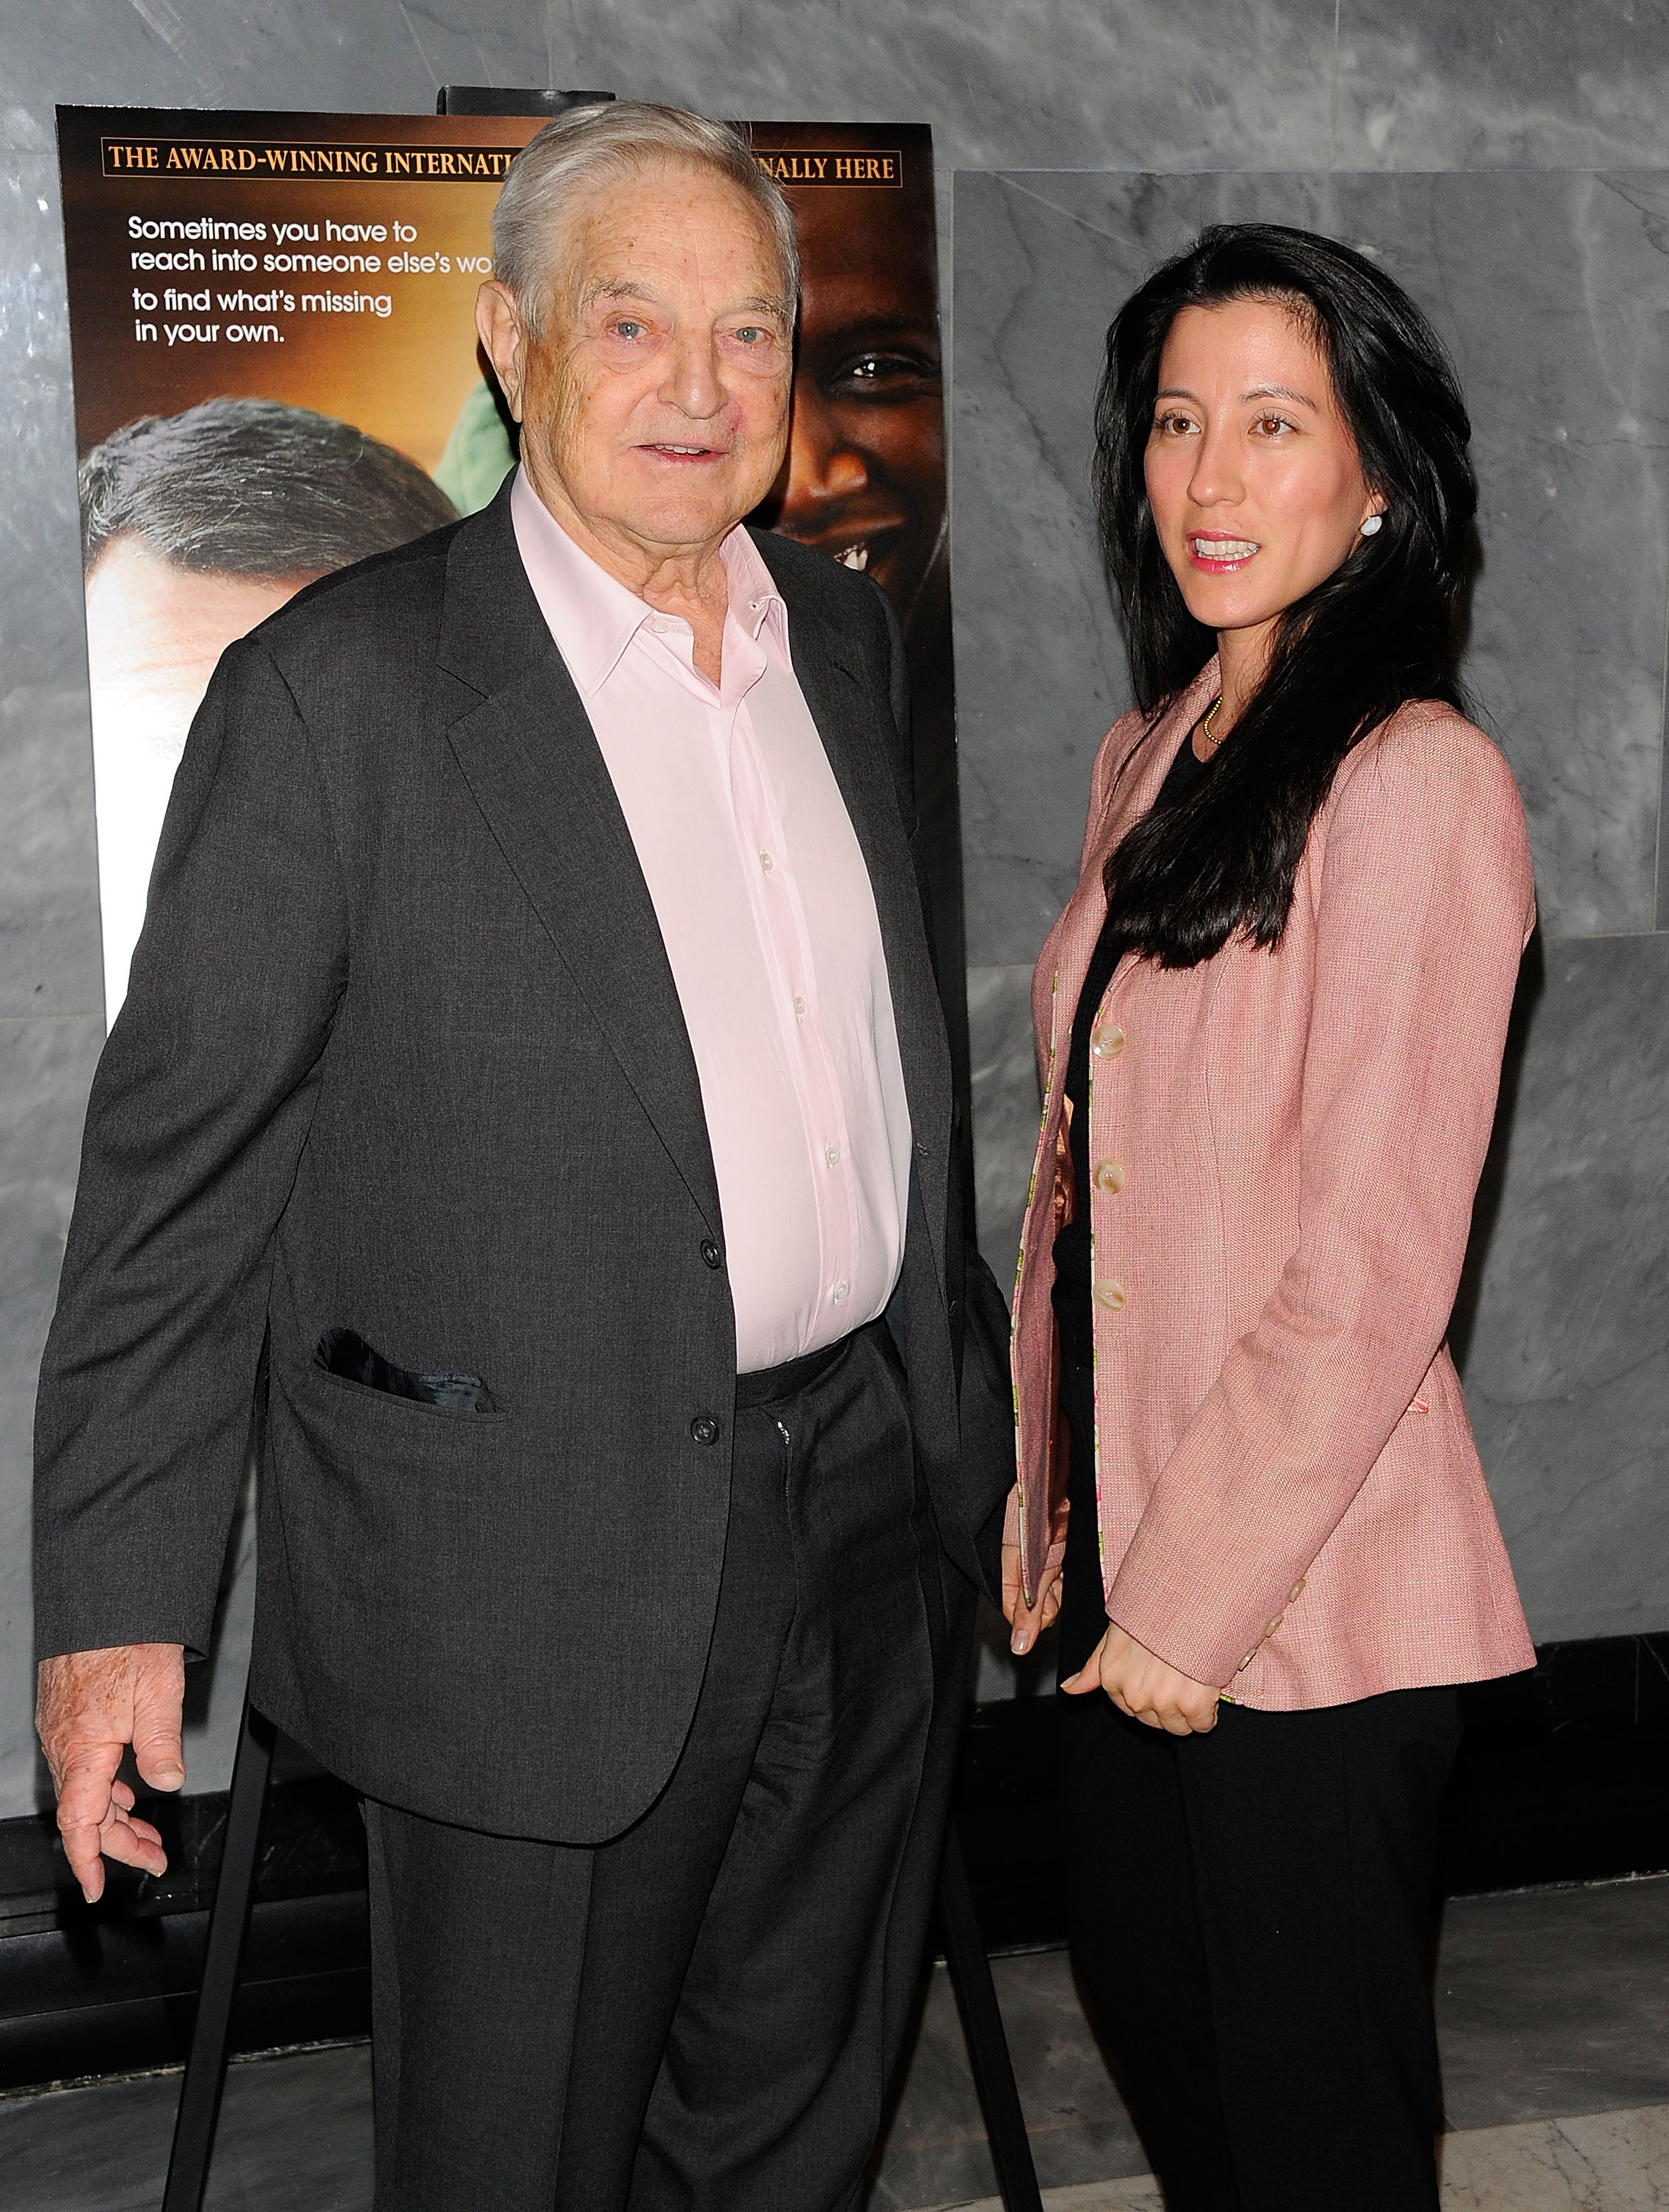 George Soros and Tamiko Bolton at a screening of "The Intouchables" on April 30, 2012, in New York City. | Source: Getty Images